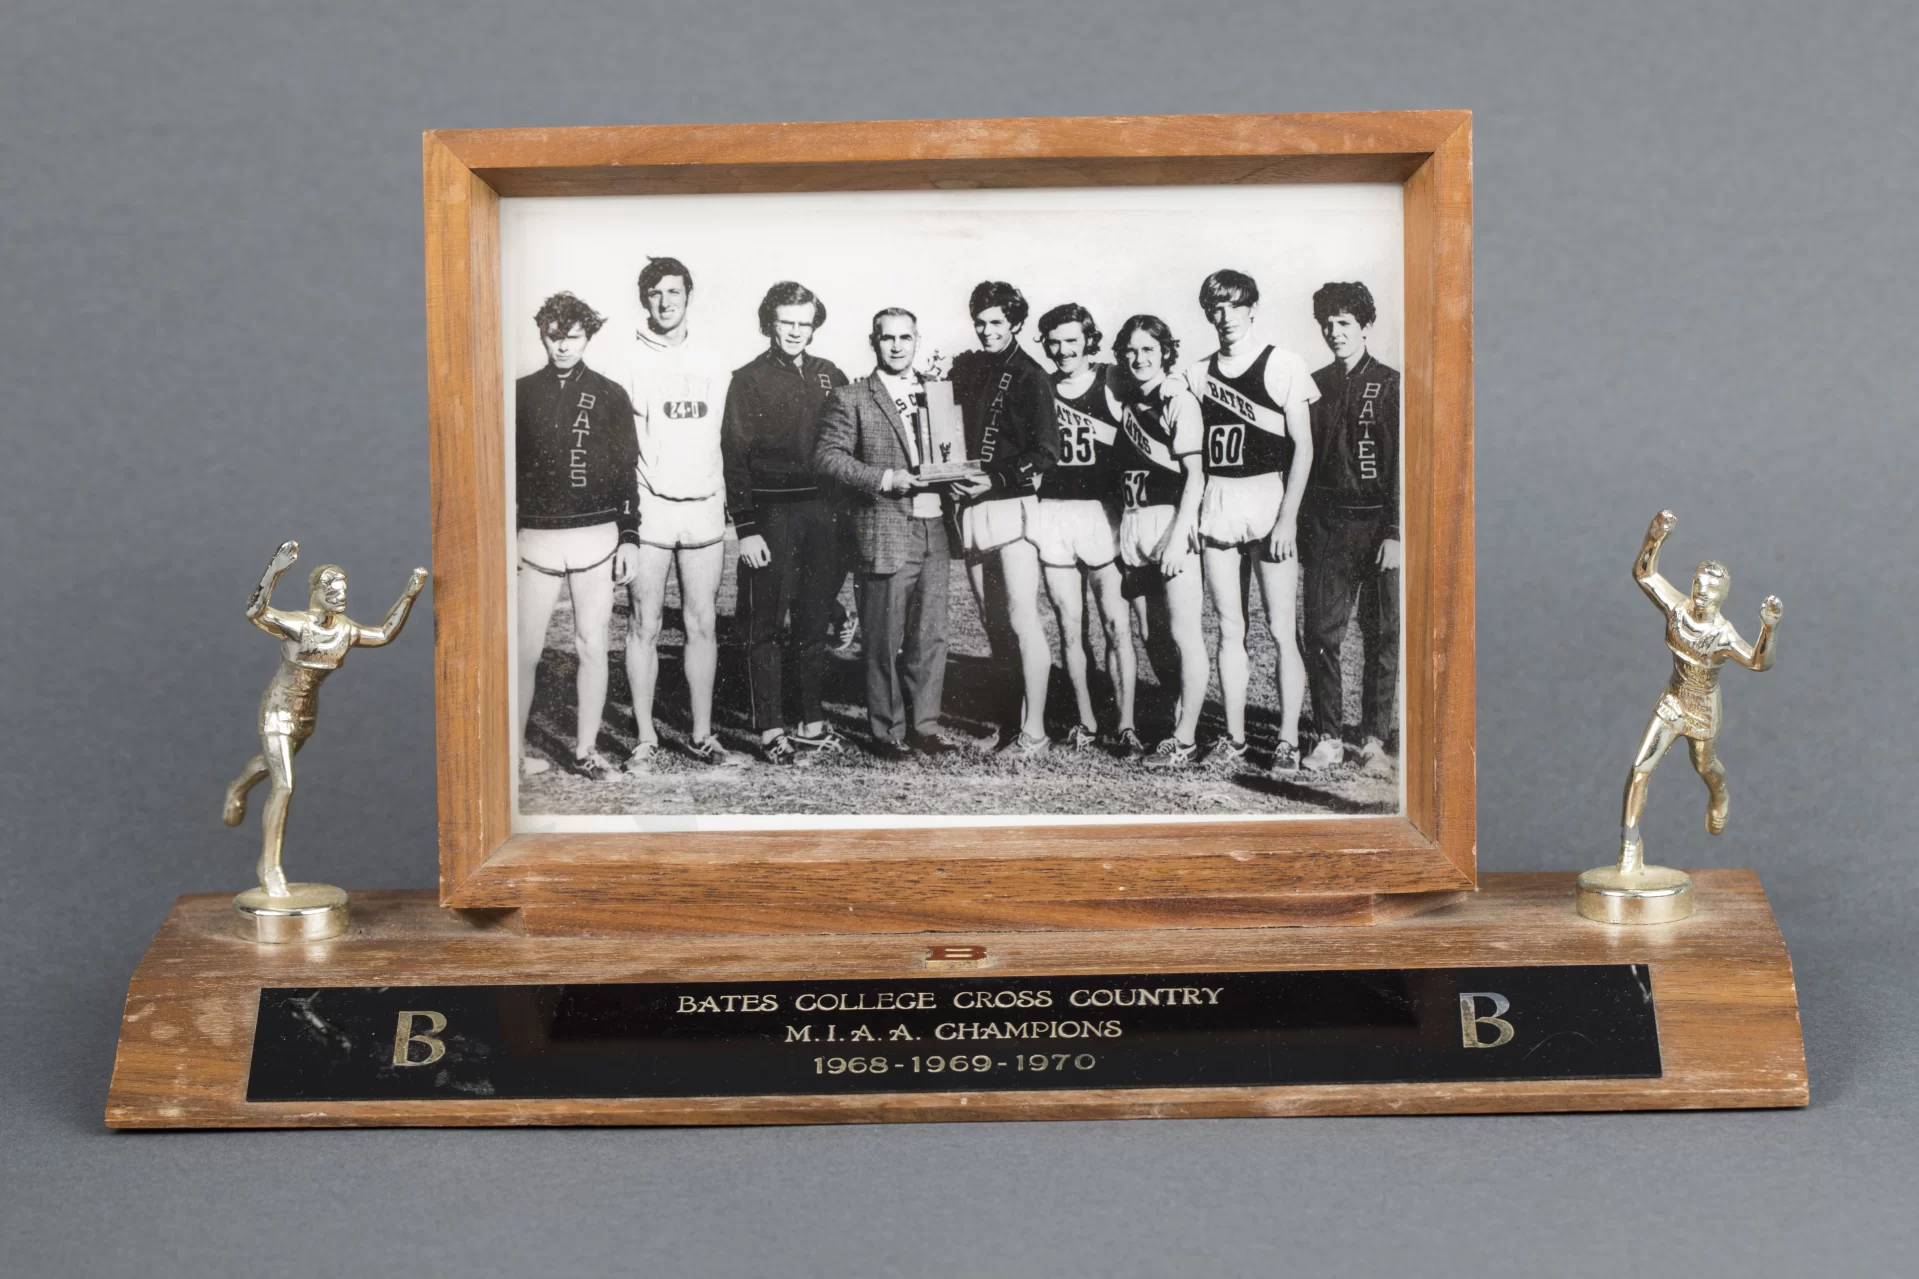 Objects from the Edmund S. Muskie Archives, photographed in the BCO studio at 141 Nichols Street, on July 19, 2018.

Trophy, Bates College Cross Country M.I.A.A. Champions, 1968, 1969, 1970; has attached framed photograph of the
team and Coach Walt Slovenski. 12 in. x 4 in. x 7 in.

Drawer
11 37